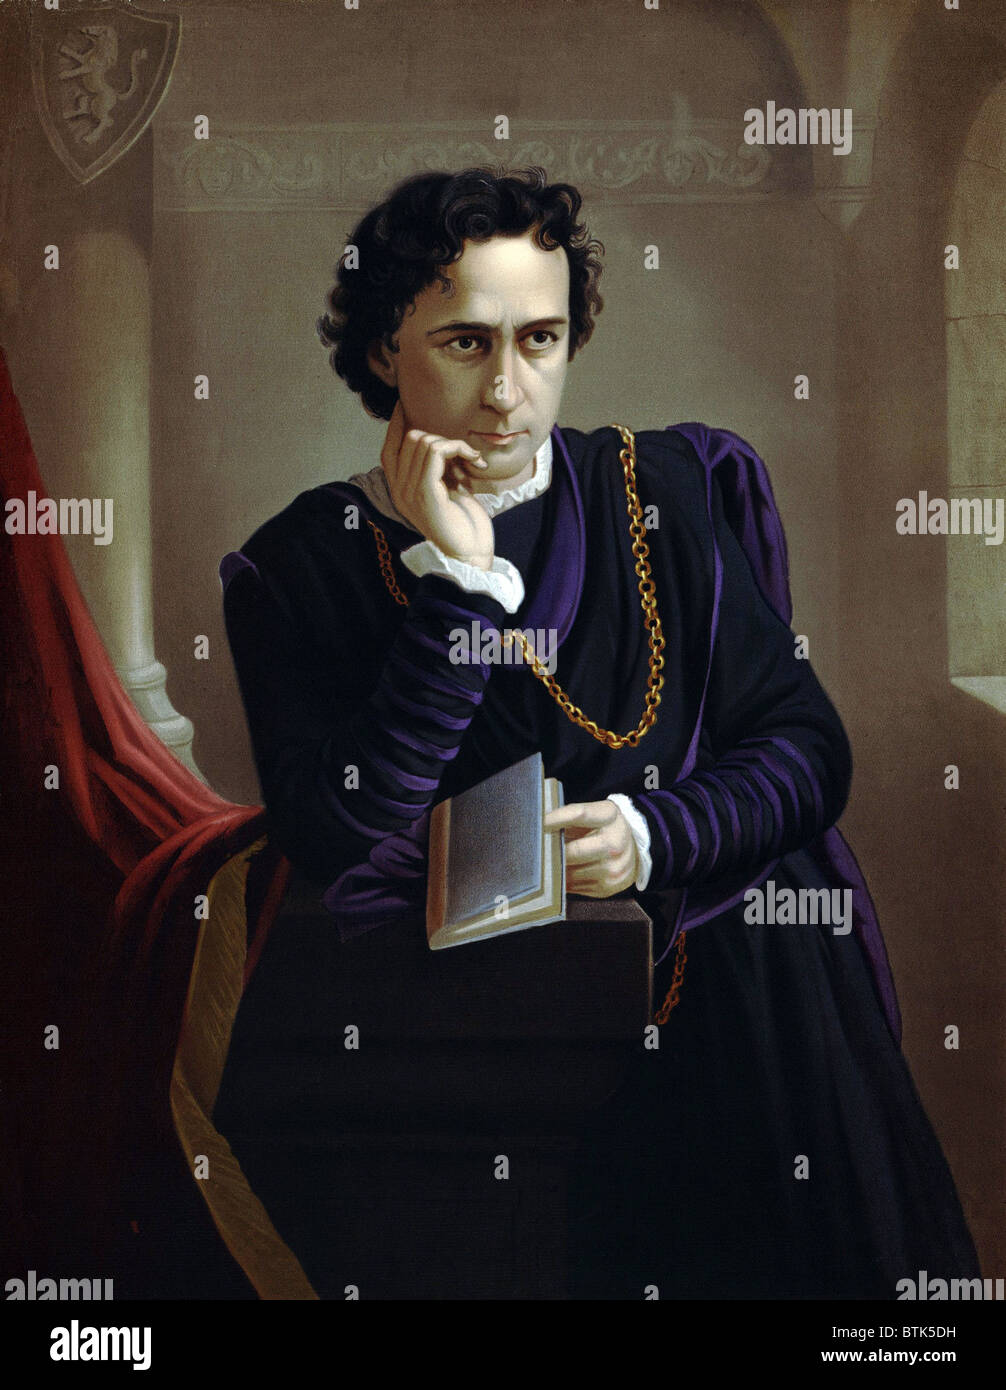 Edwin Booth (1833-1893), American actor. Hamlet was his signature role. 1873 poster. Stock Photo